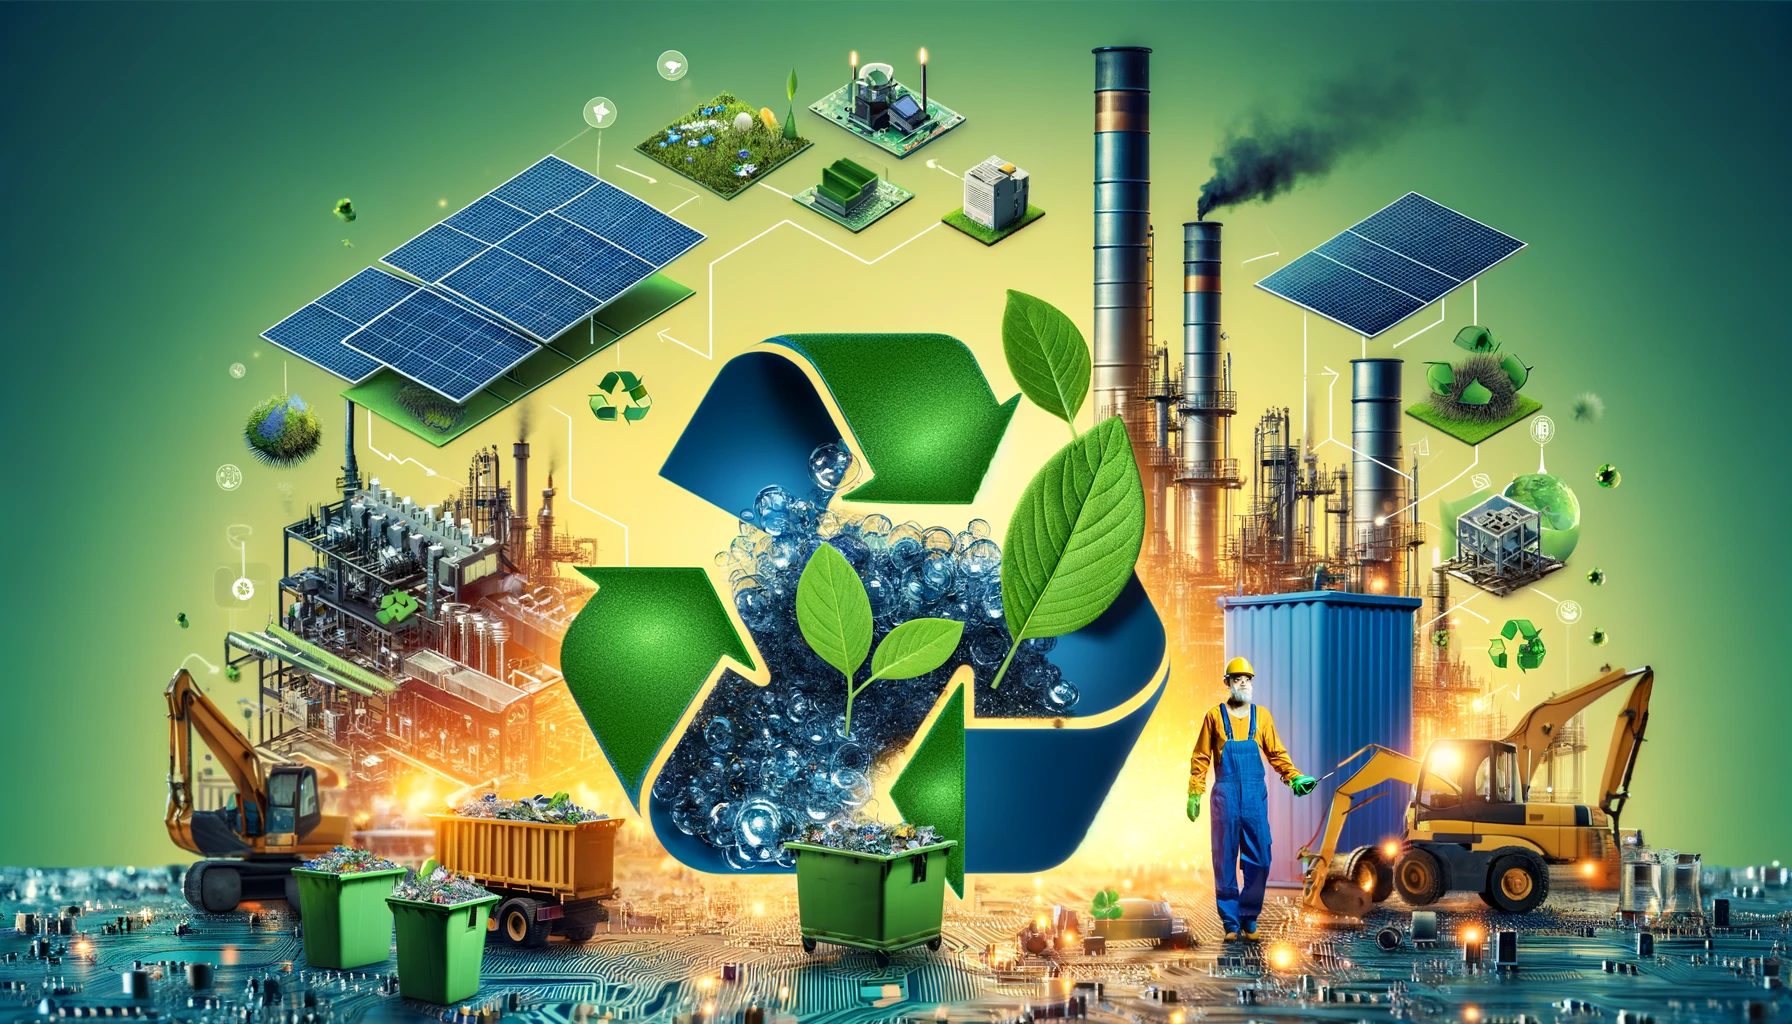 Environmental Considerations in LCD Production: Focuses on recycling processes, sustainable materials, and reducing electronic waste in LCD production.